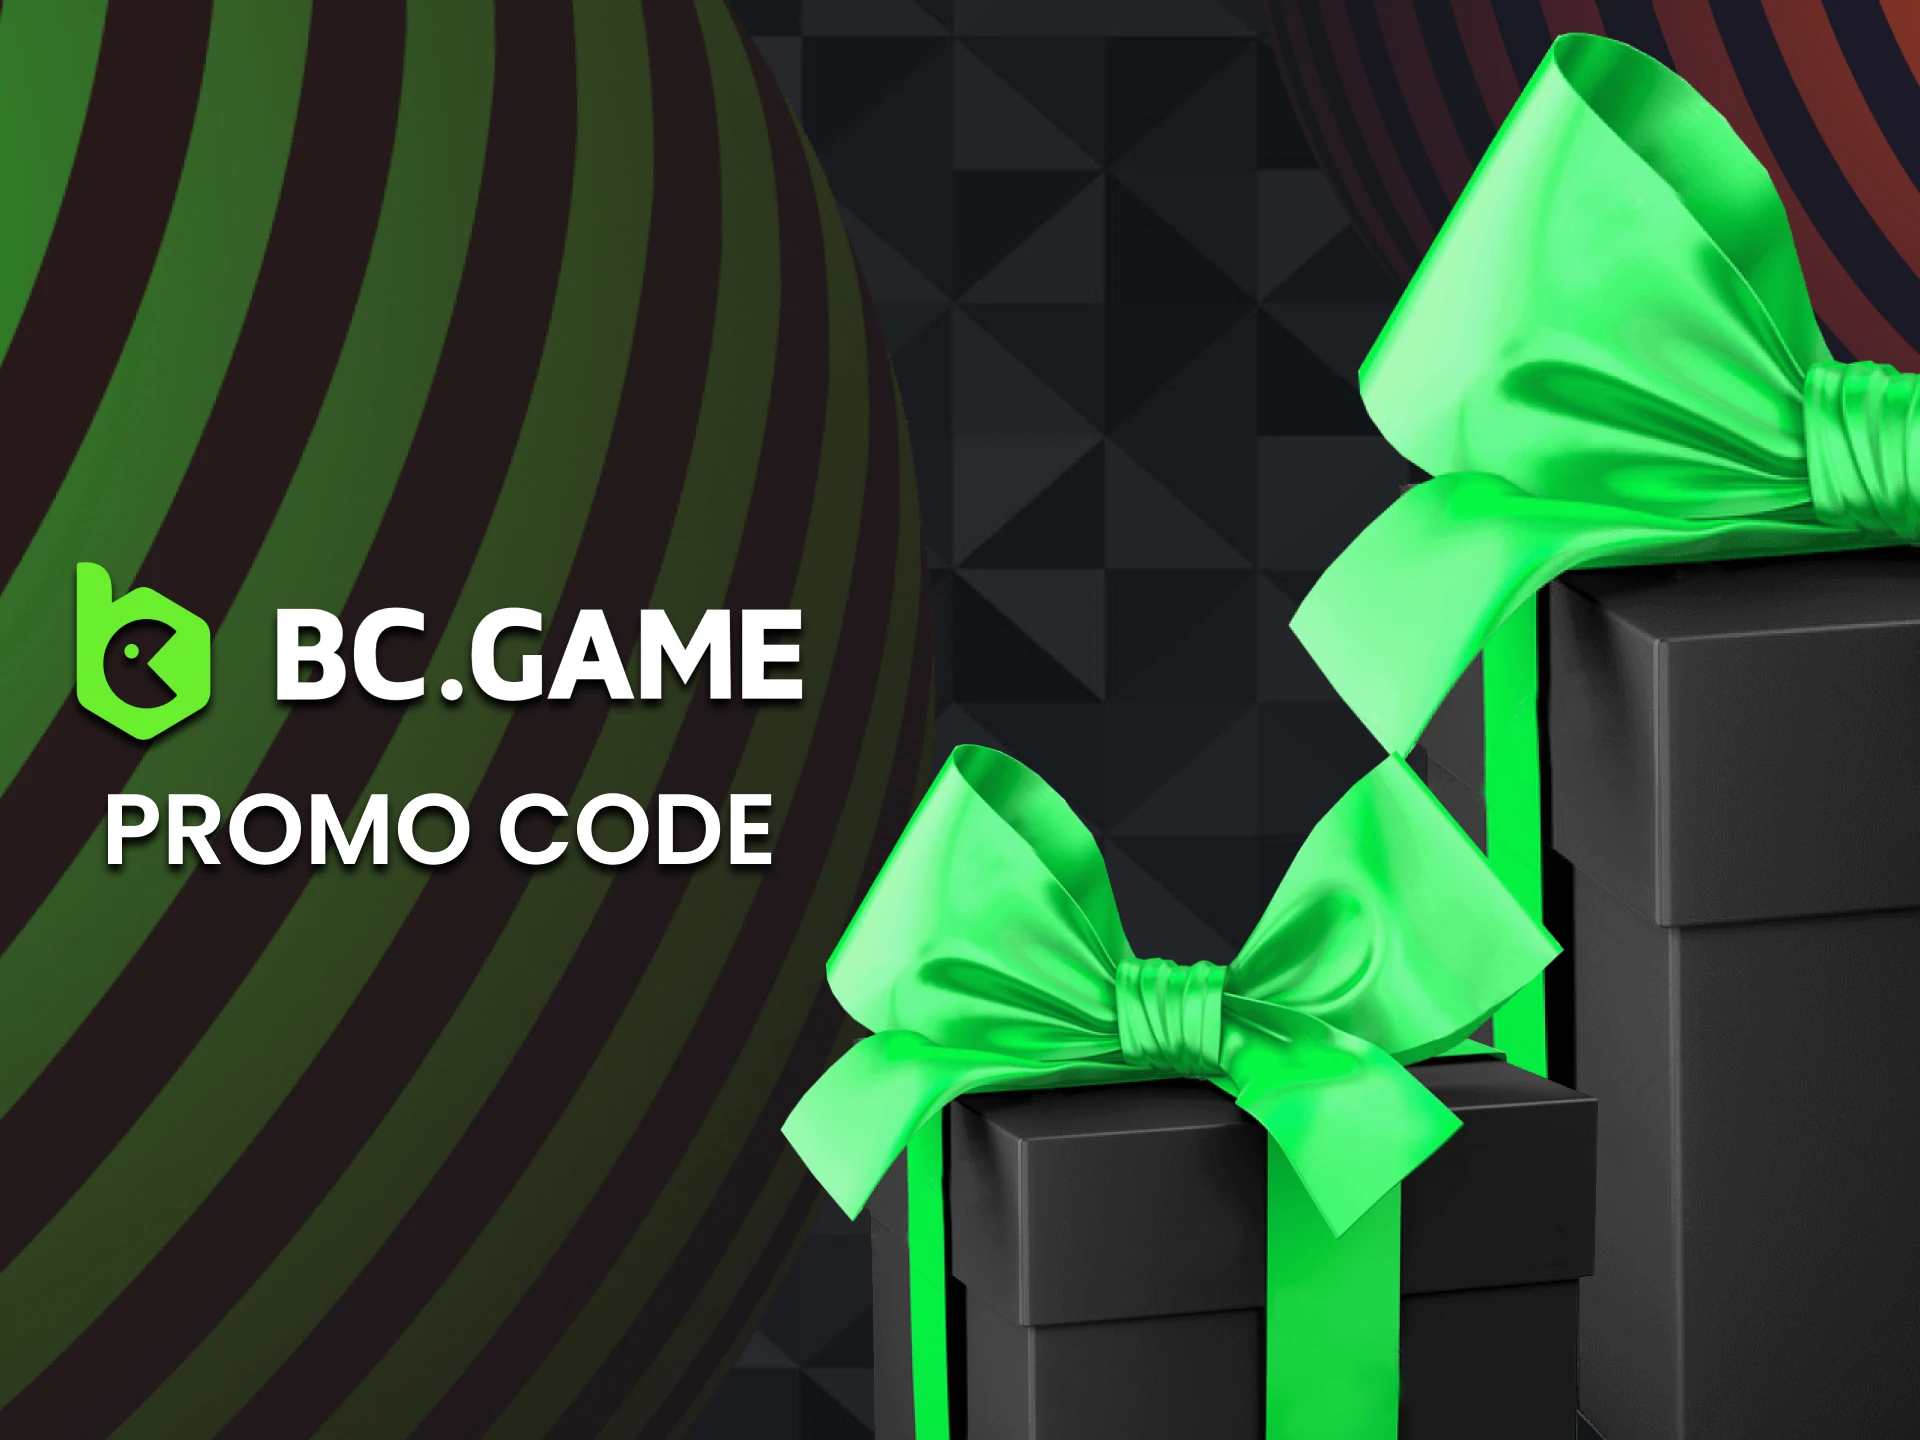 Activate BC Game promo code to get additional bonuses when creating an account.